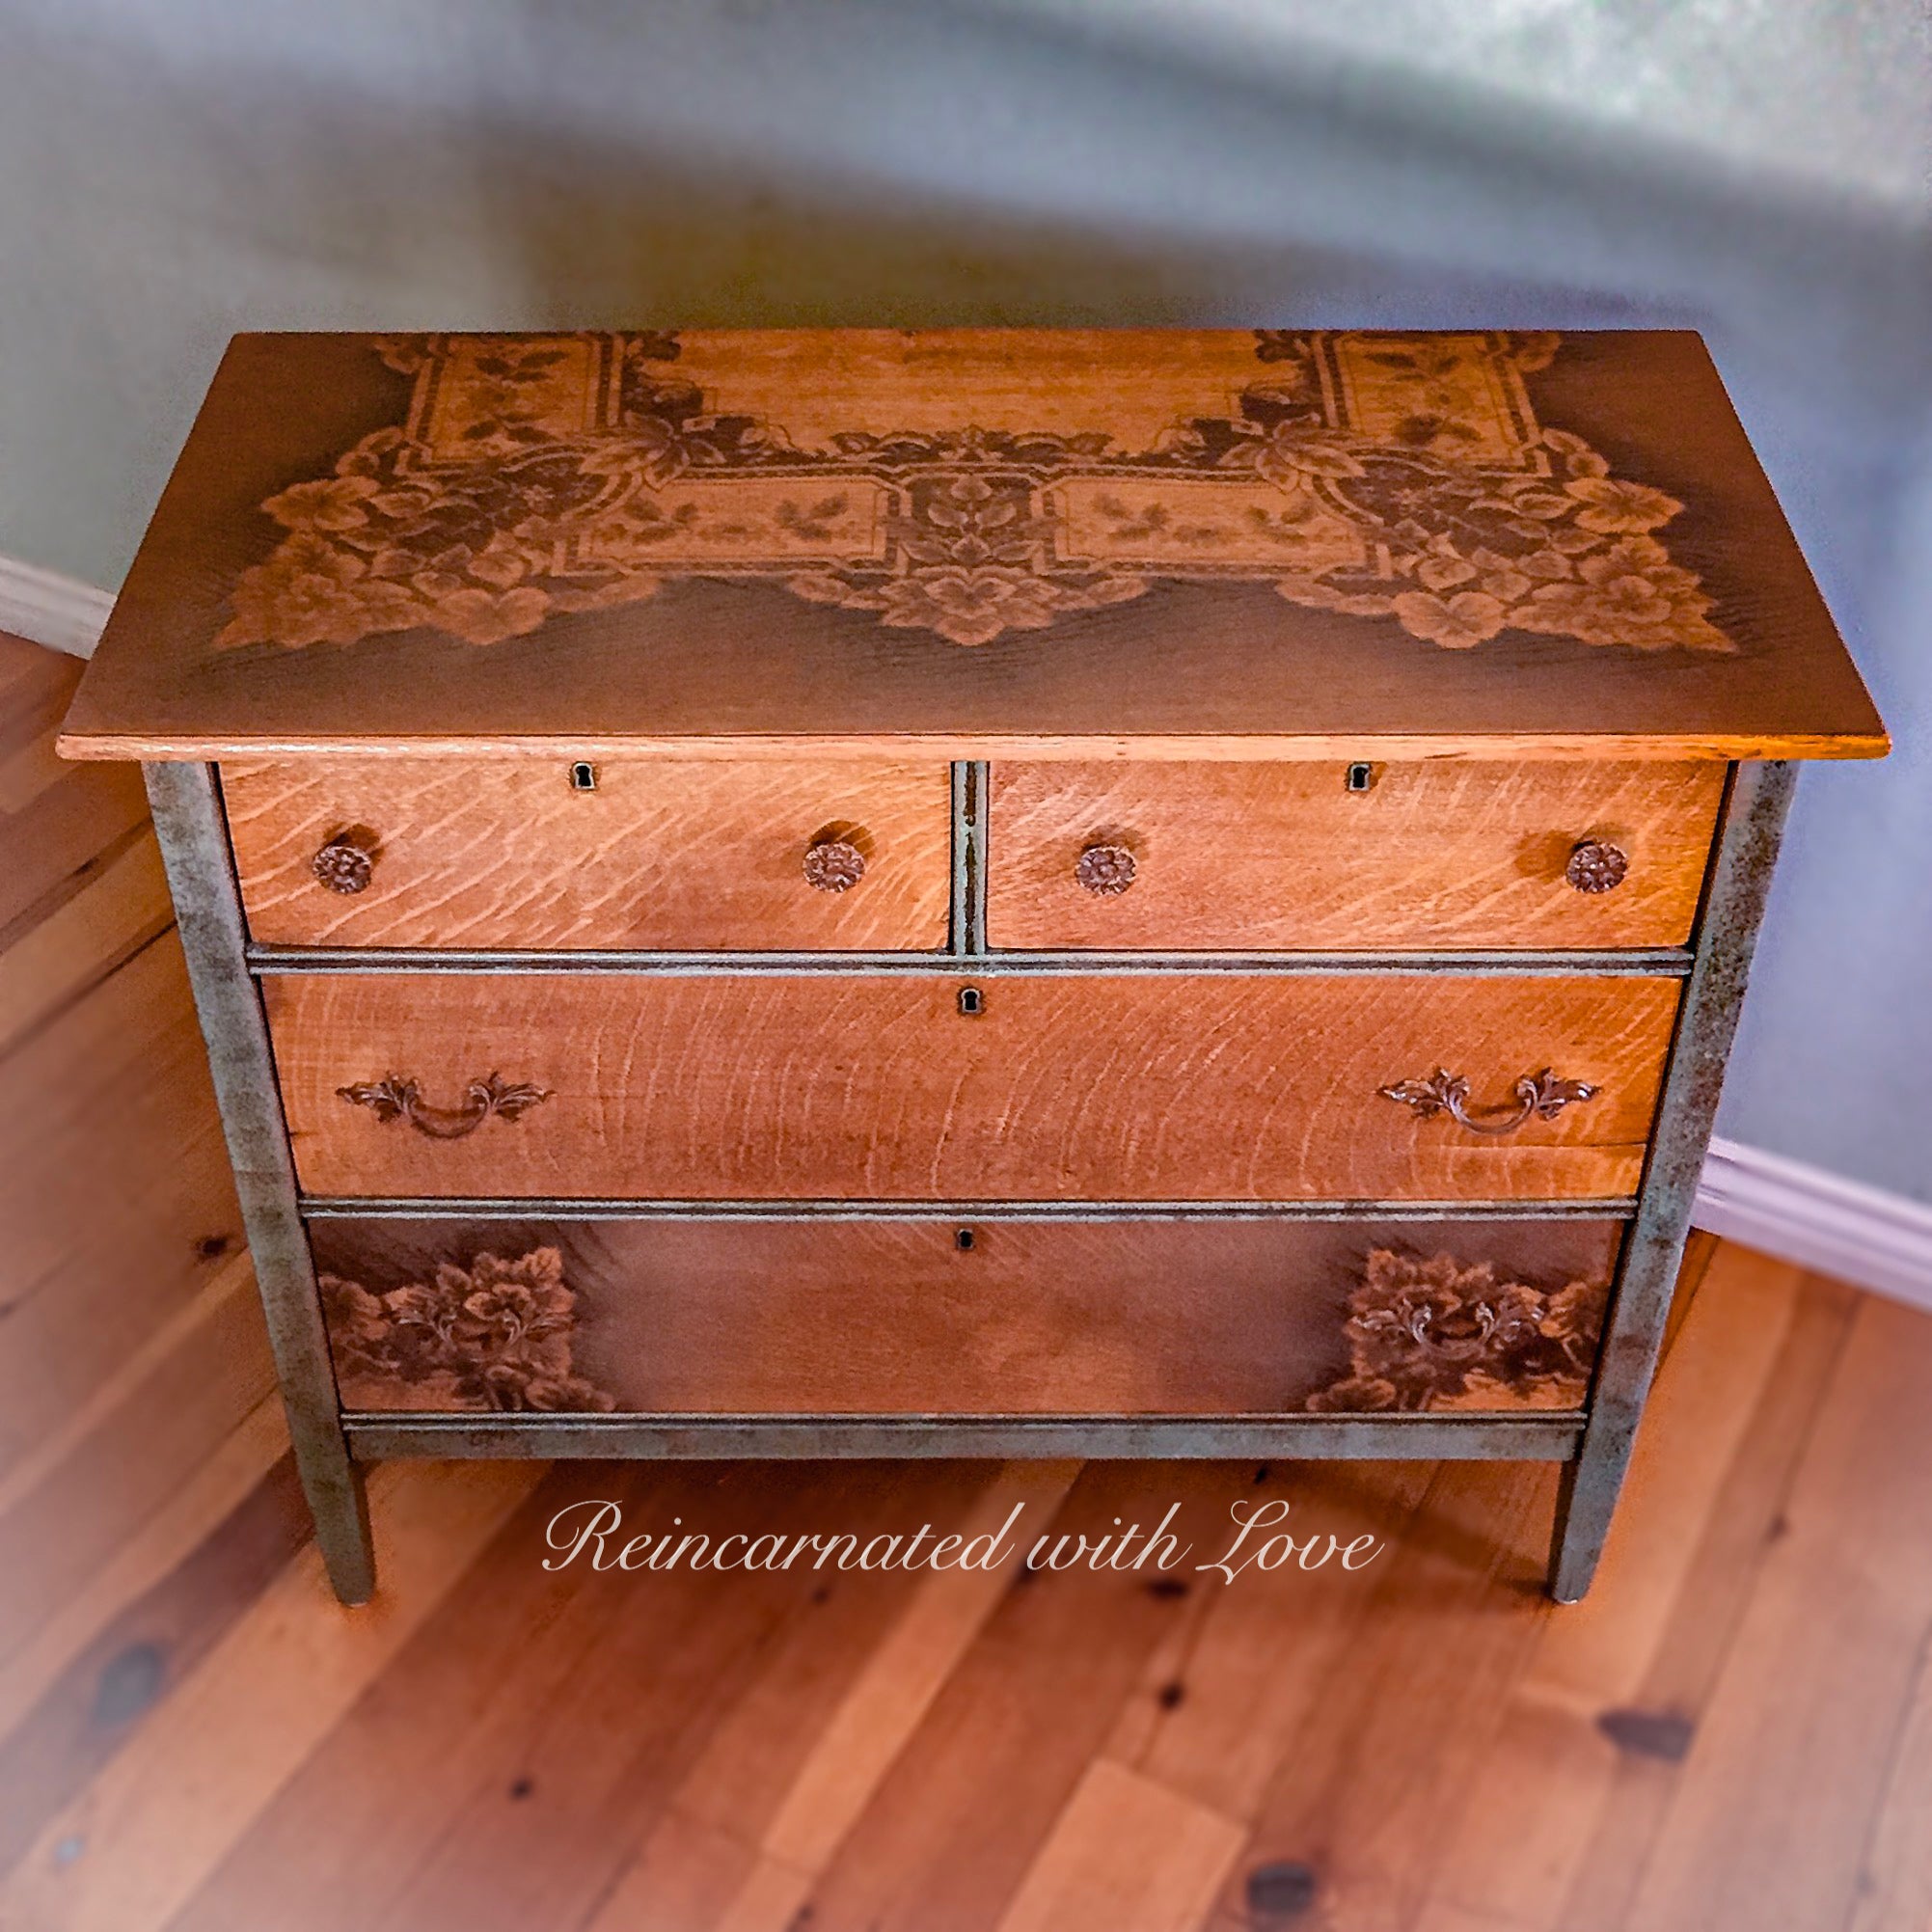 A farmhouse style, chest of drawers, with locking drawers, painted with green trim, stained wood & lace accents.